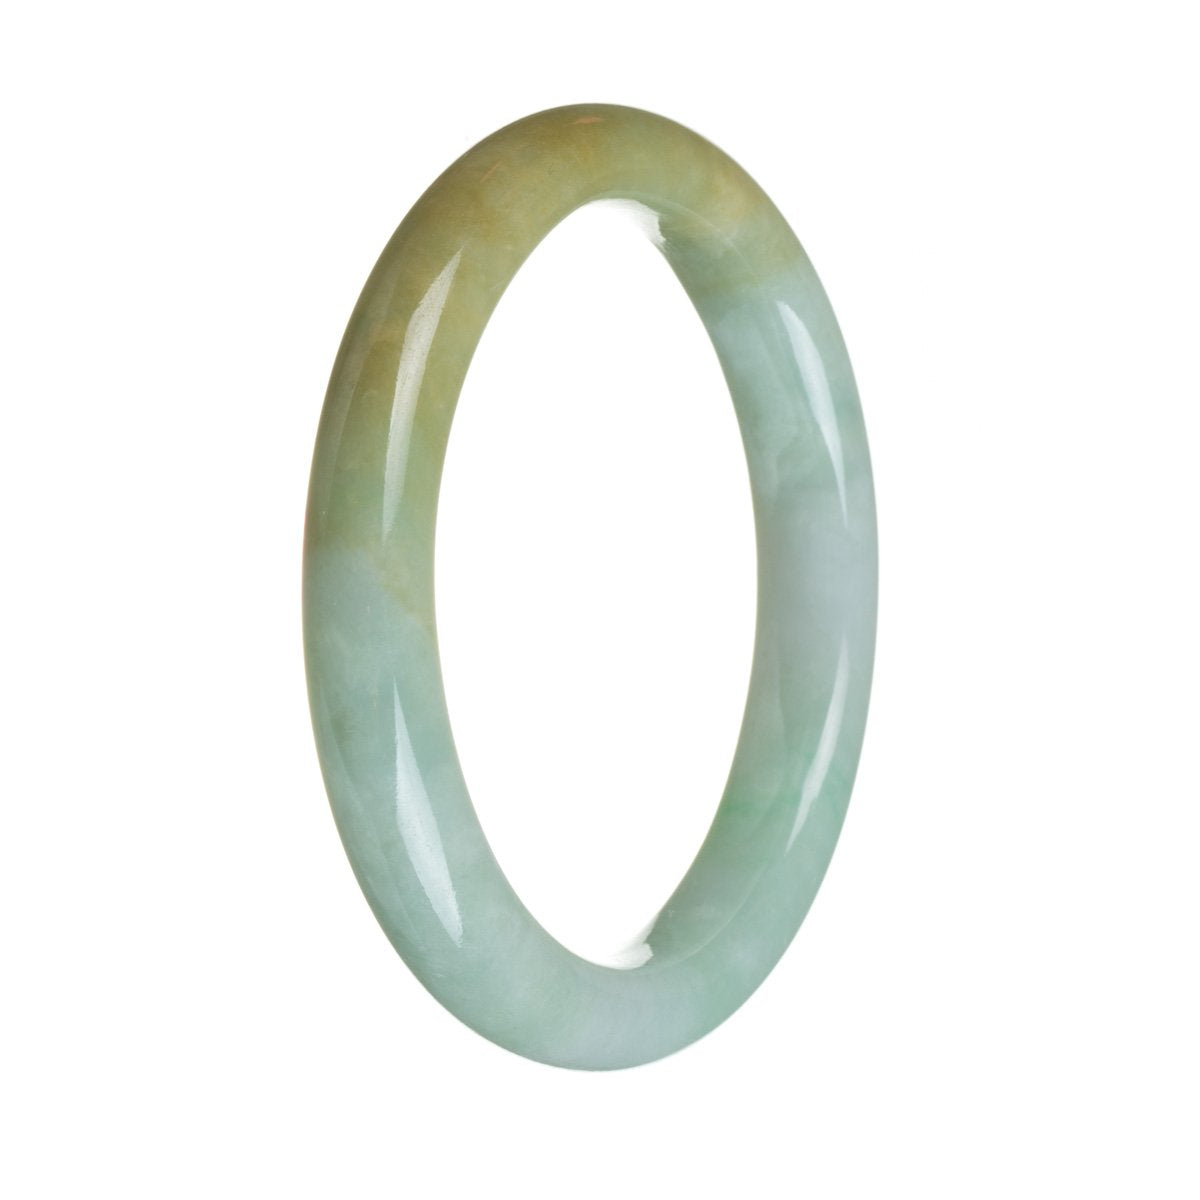 A semi-round, grade A green and brown jadeite bangle with a diameter of 63mm.